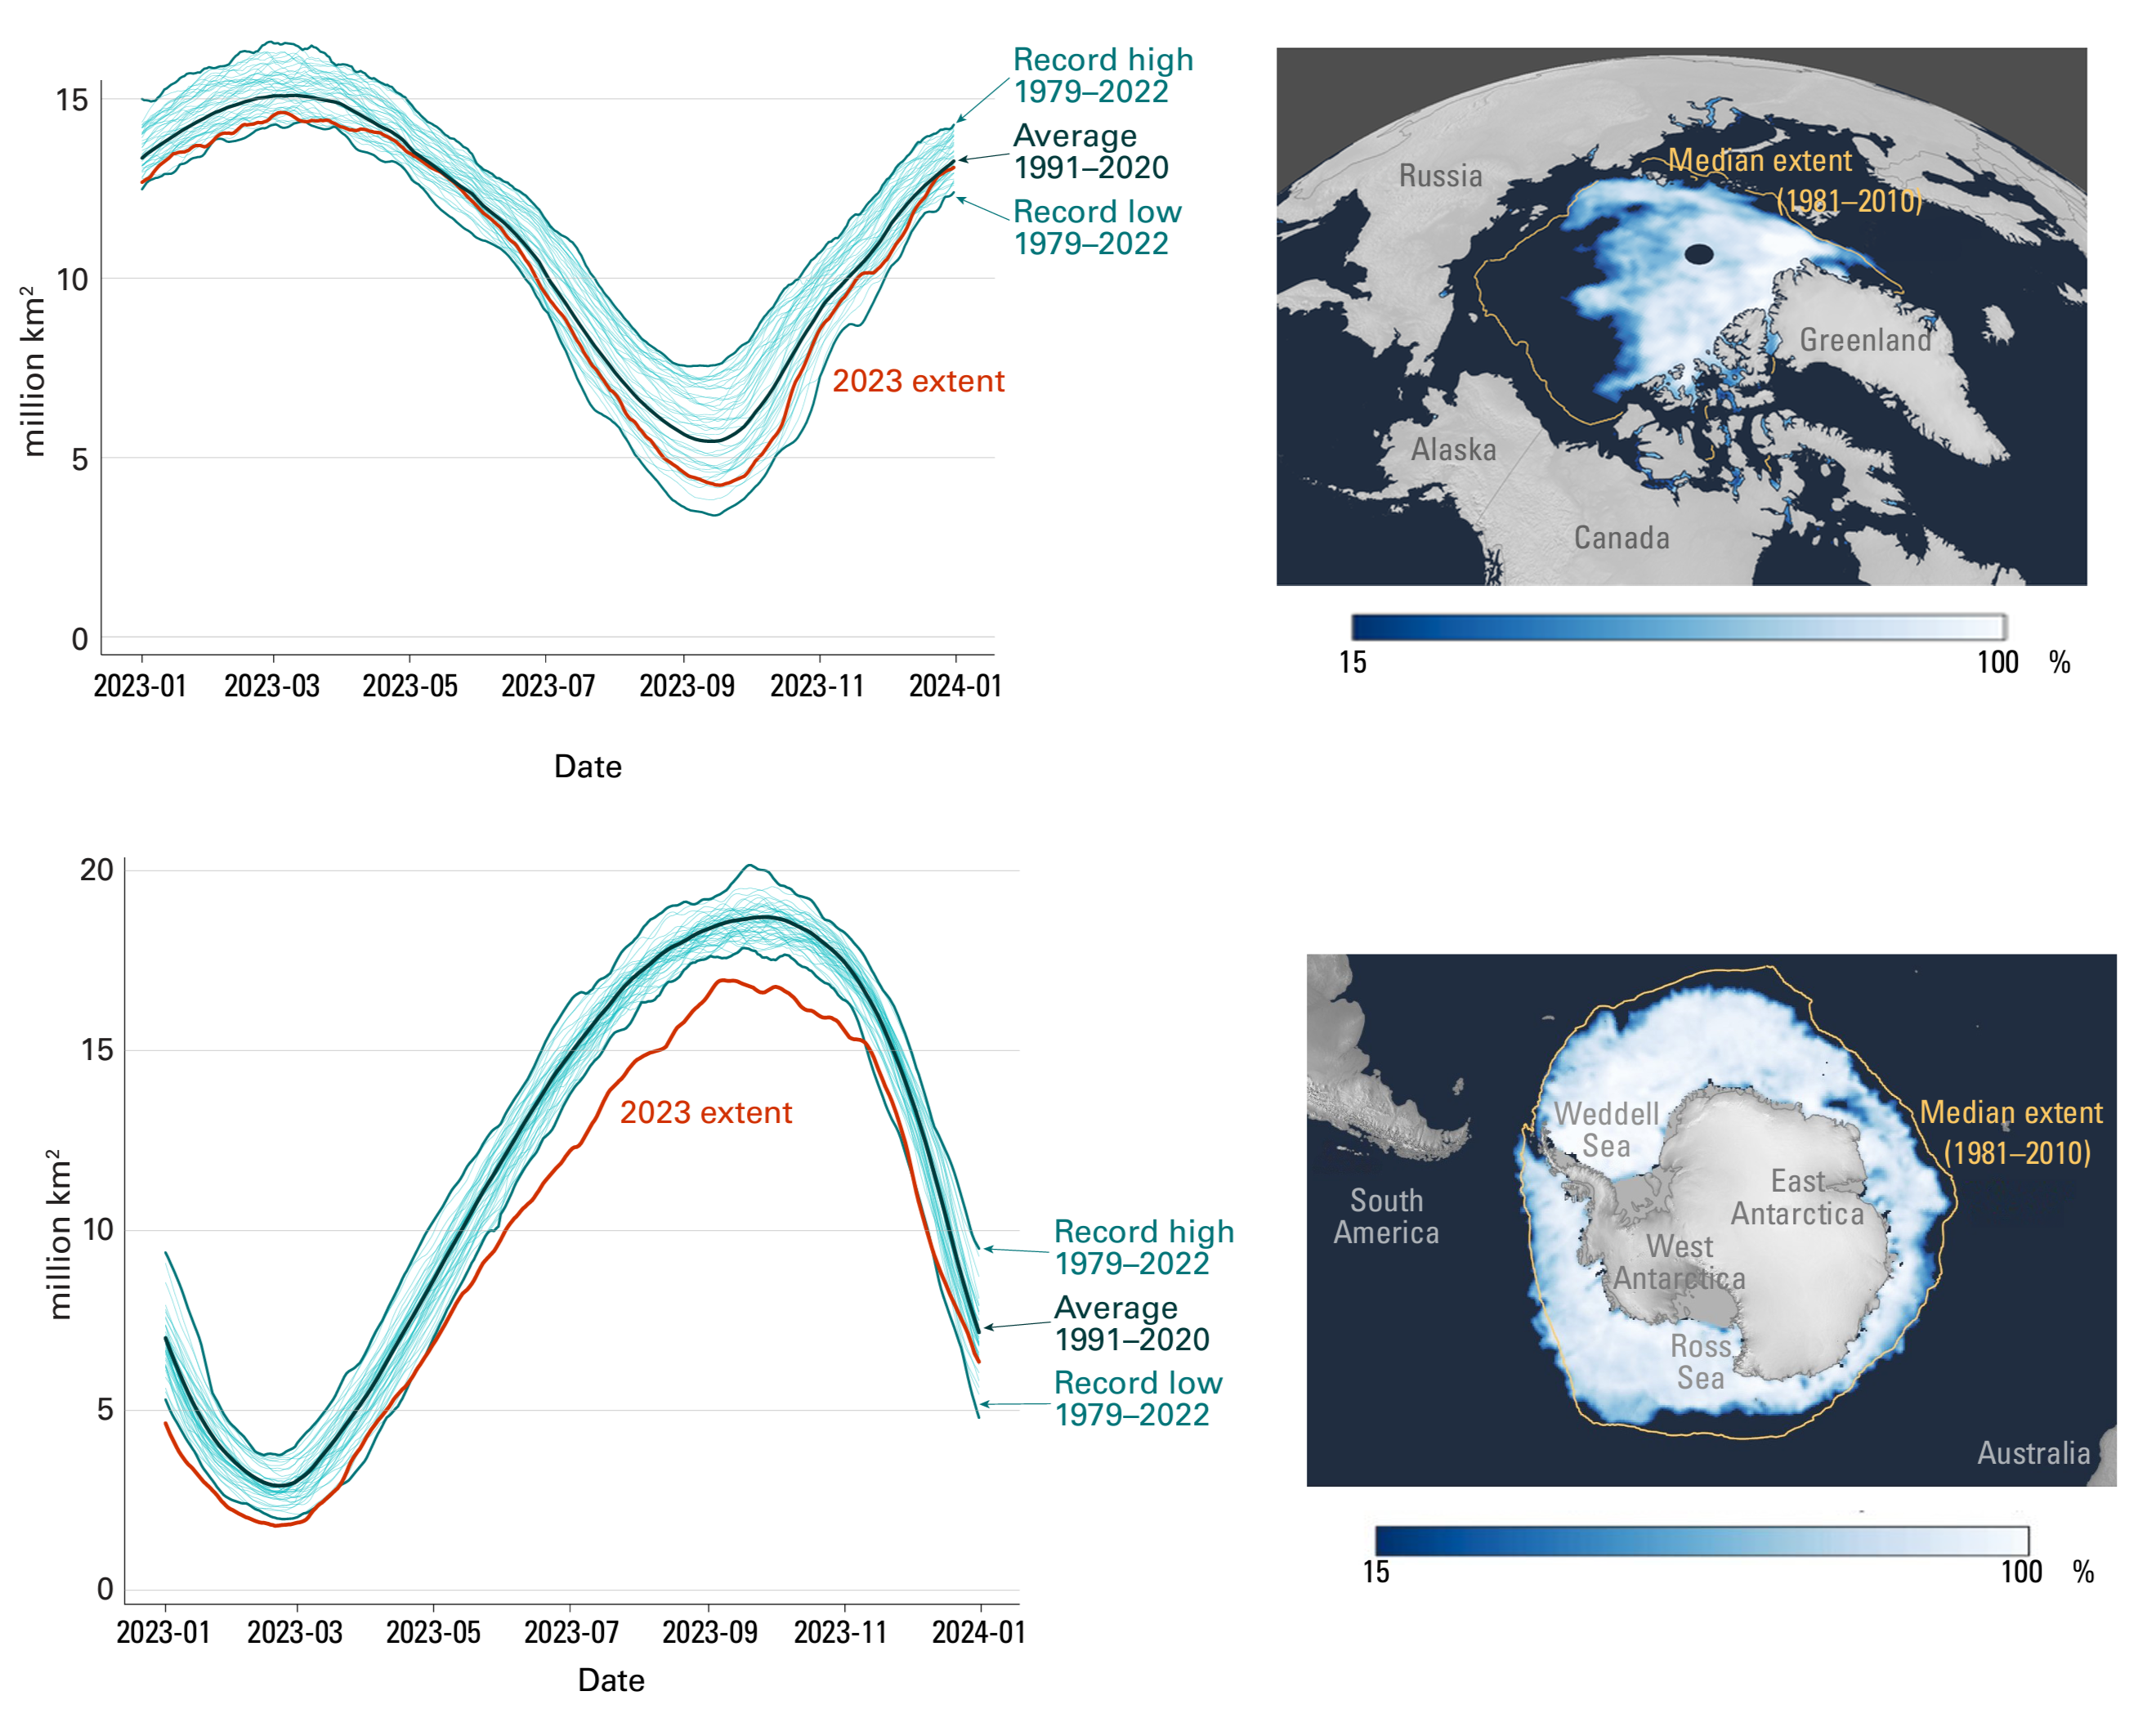 Daily Arctic (top) and Antarctic (bottom) sea-ice extent from January through December, showing 2023 (red line) against the climate normal (1991-2020, dark blue), and the record highest and lowest extents for each day (mid-blue). Individual years are shown in light blue. (right, top) Arctic sea-ice concentration on 19 September 2023, at the annual minimum Arctic sea-ice extent. (right, bottom) Antarctic sea-ice concentration on 10 September 2023, at the 2023 annual maximum extent. The yellow line indicates the median ice edge for the 1981-2010 period. Graphic: WMO